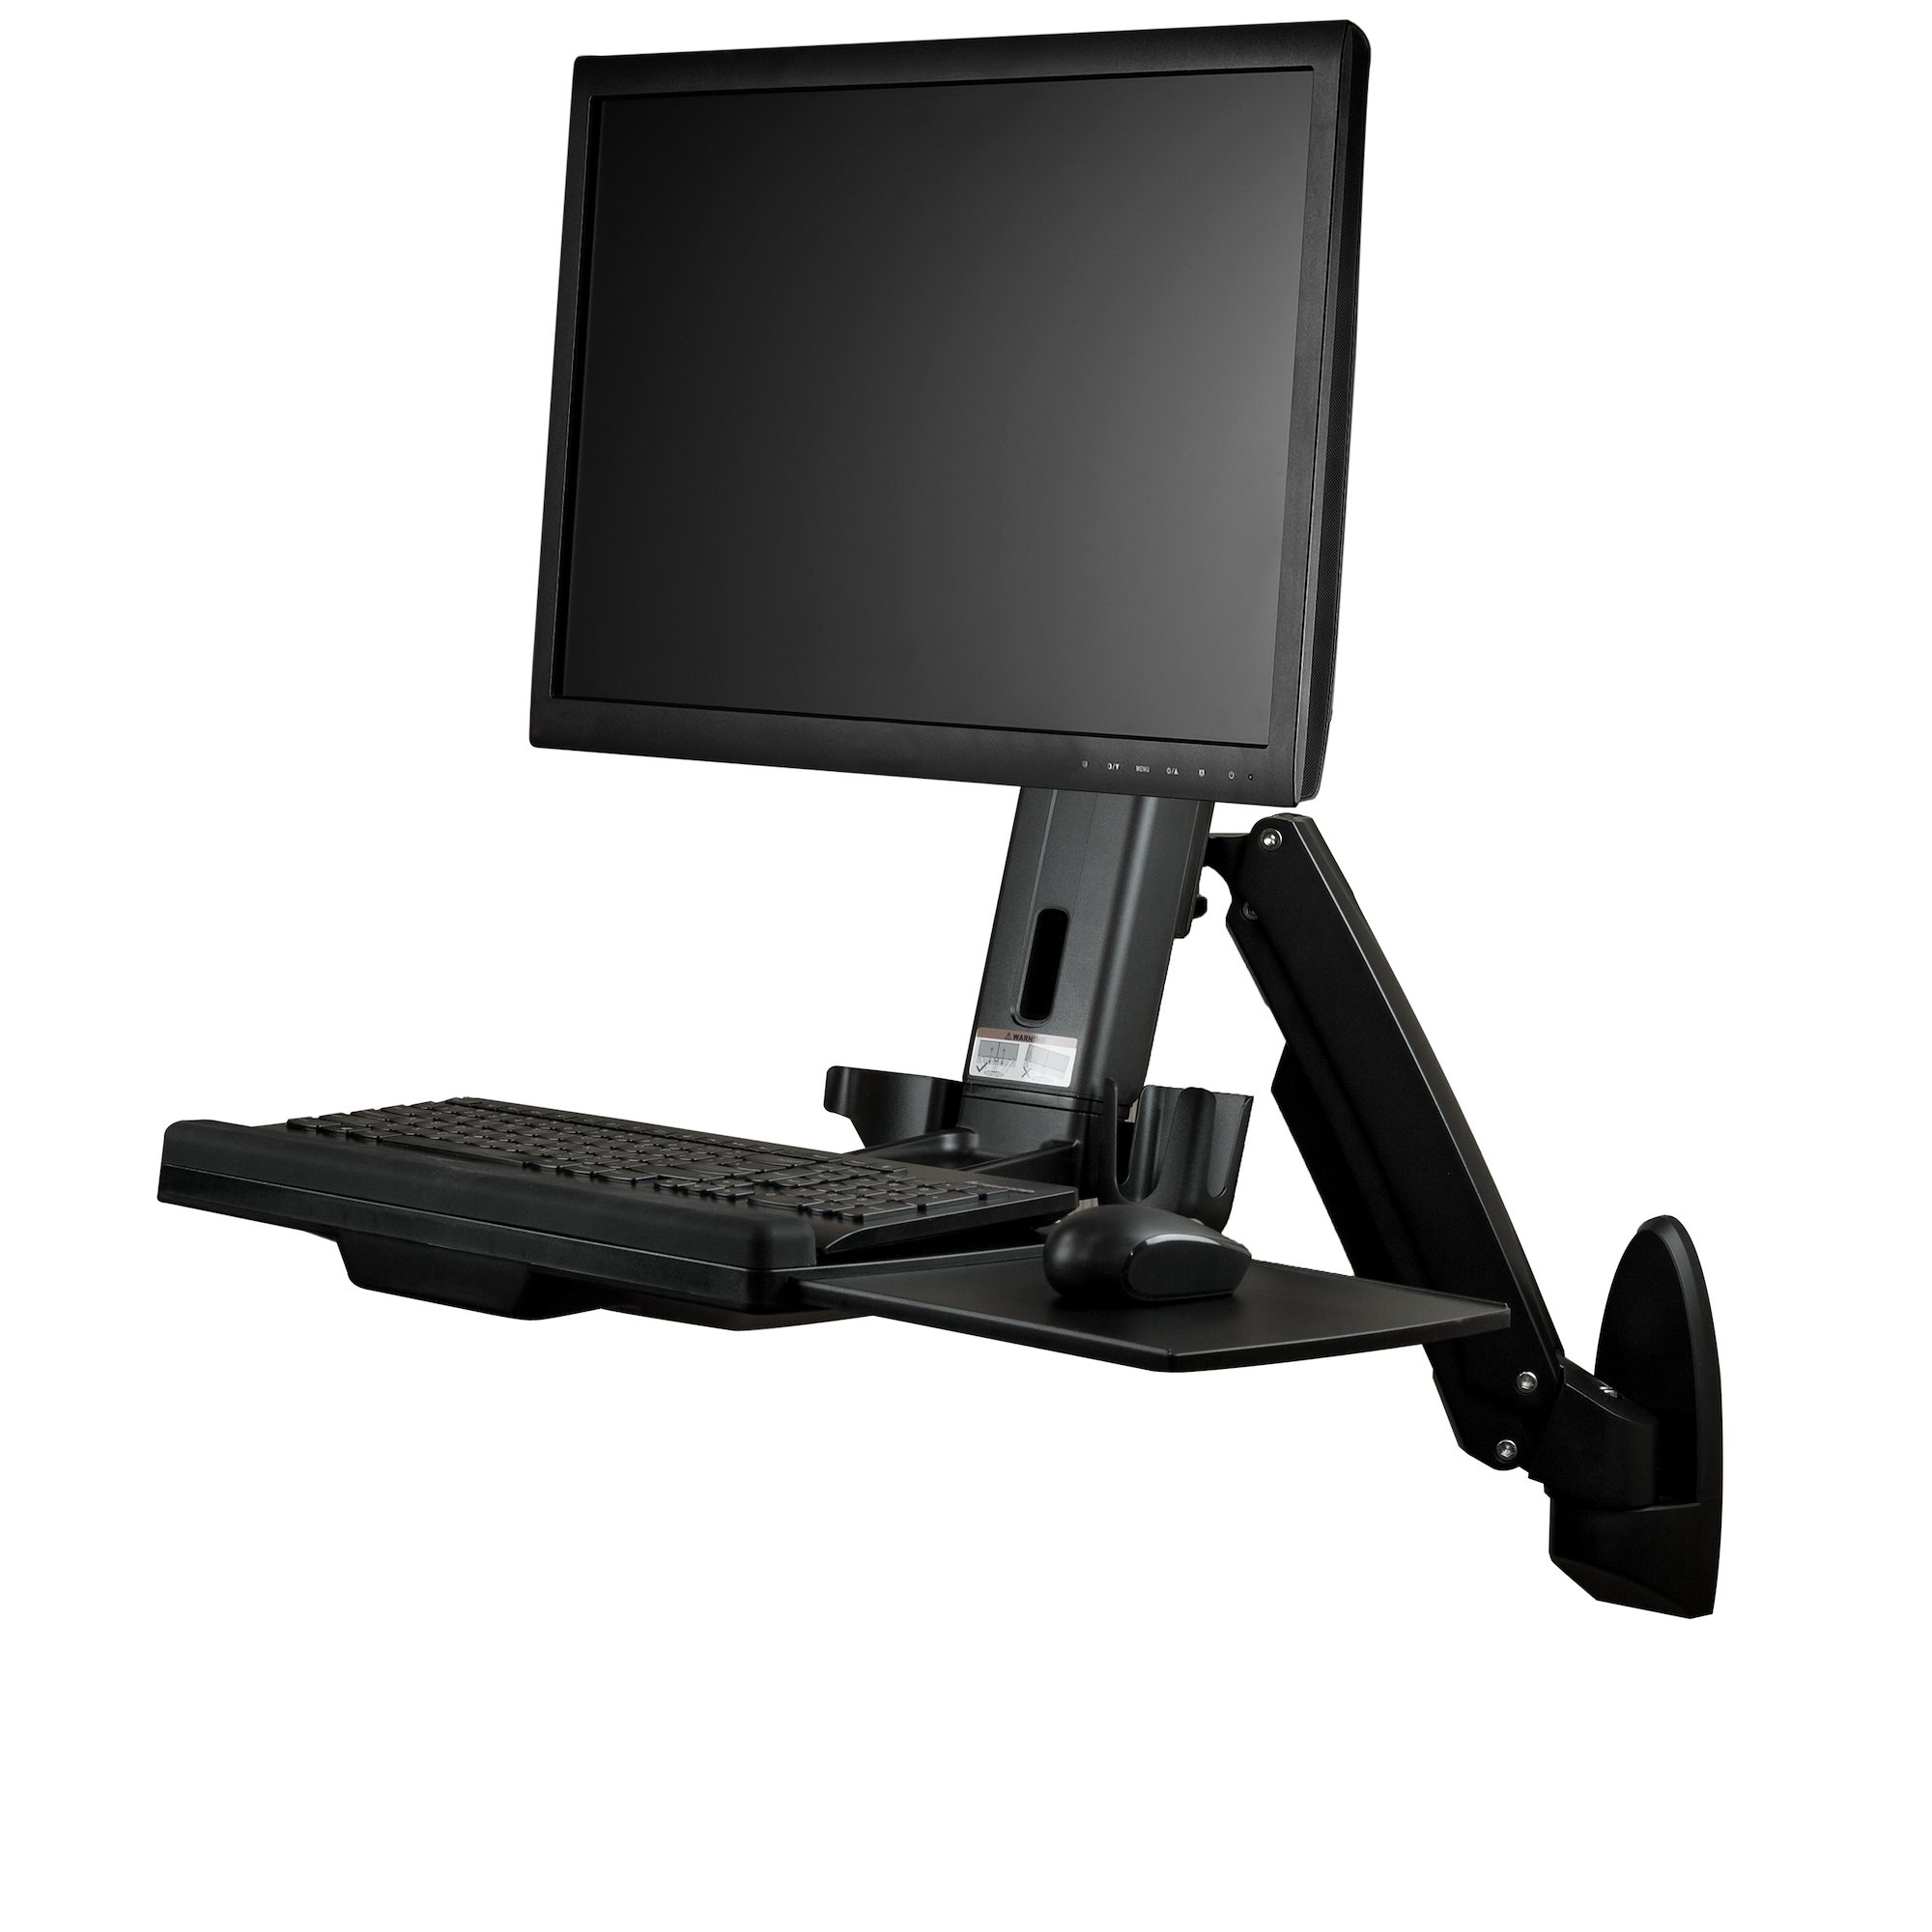 StarTech.com Wall Mount Workstation - Articulating Full Motion Standing Desk with Ergonomic Height Adjustable Monitor & Keyboard Tray Arm - Mouse & Scanner Holders - Single VESA Display